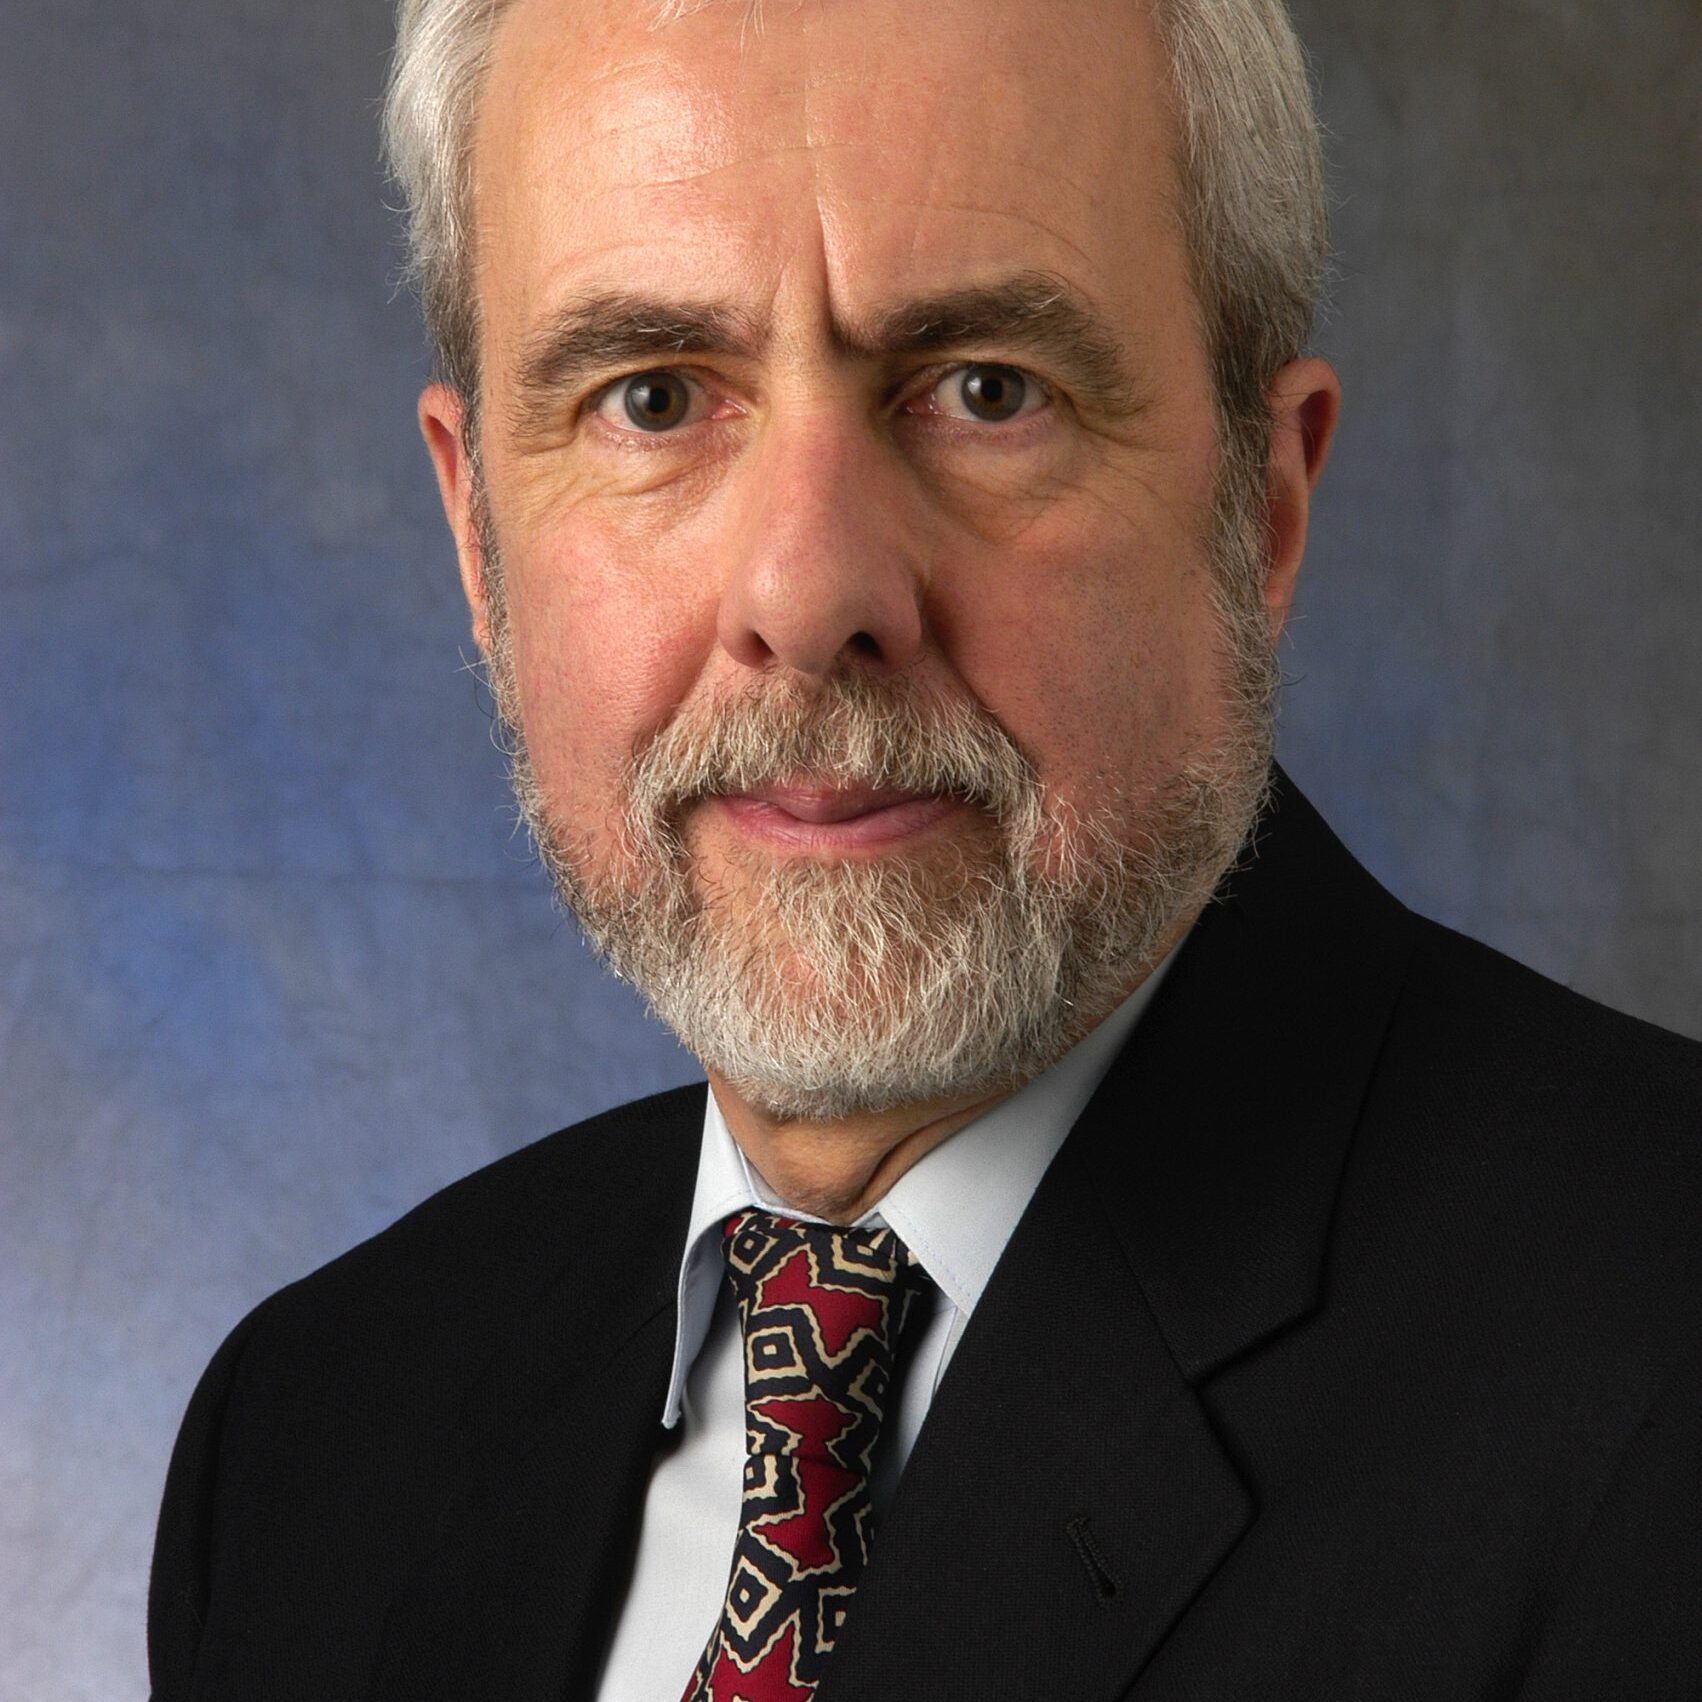 Portrait of Robert Lindsay, MD, PhD, Chief of Osteoporosis Center and Director of Clinical Research Center at Helen Hayes Hospital